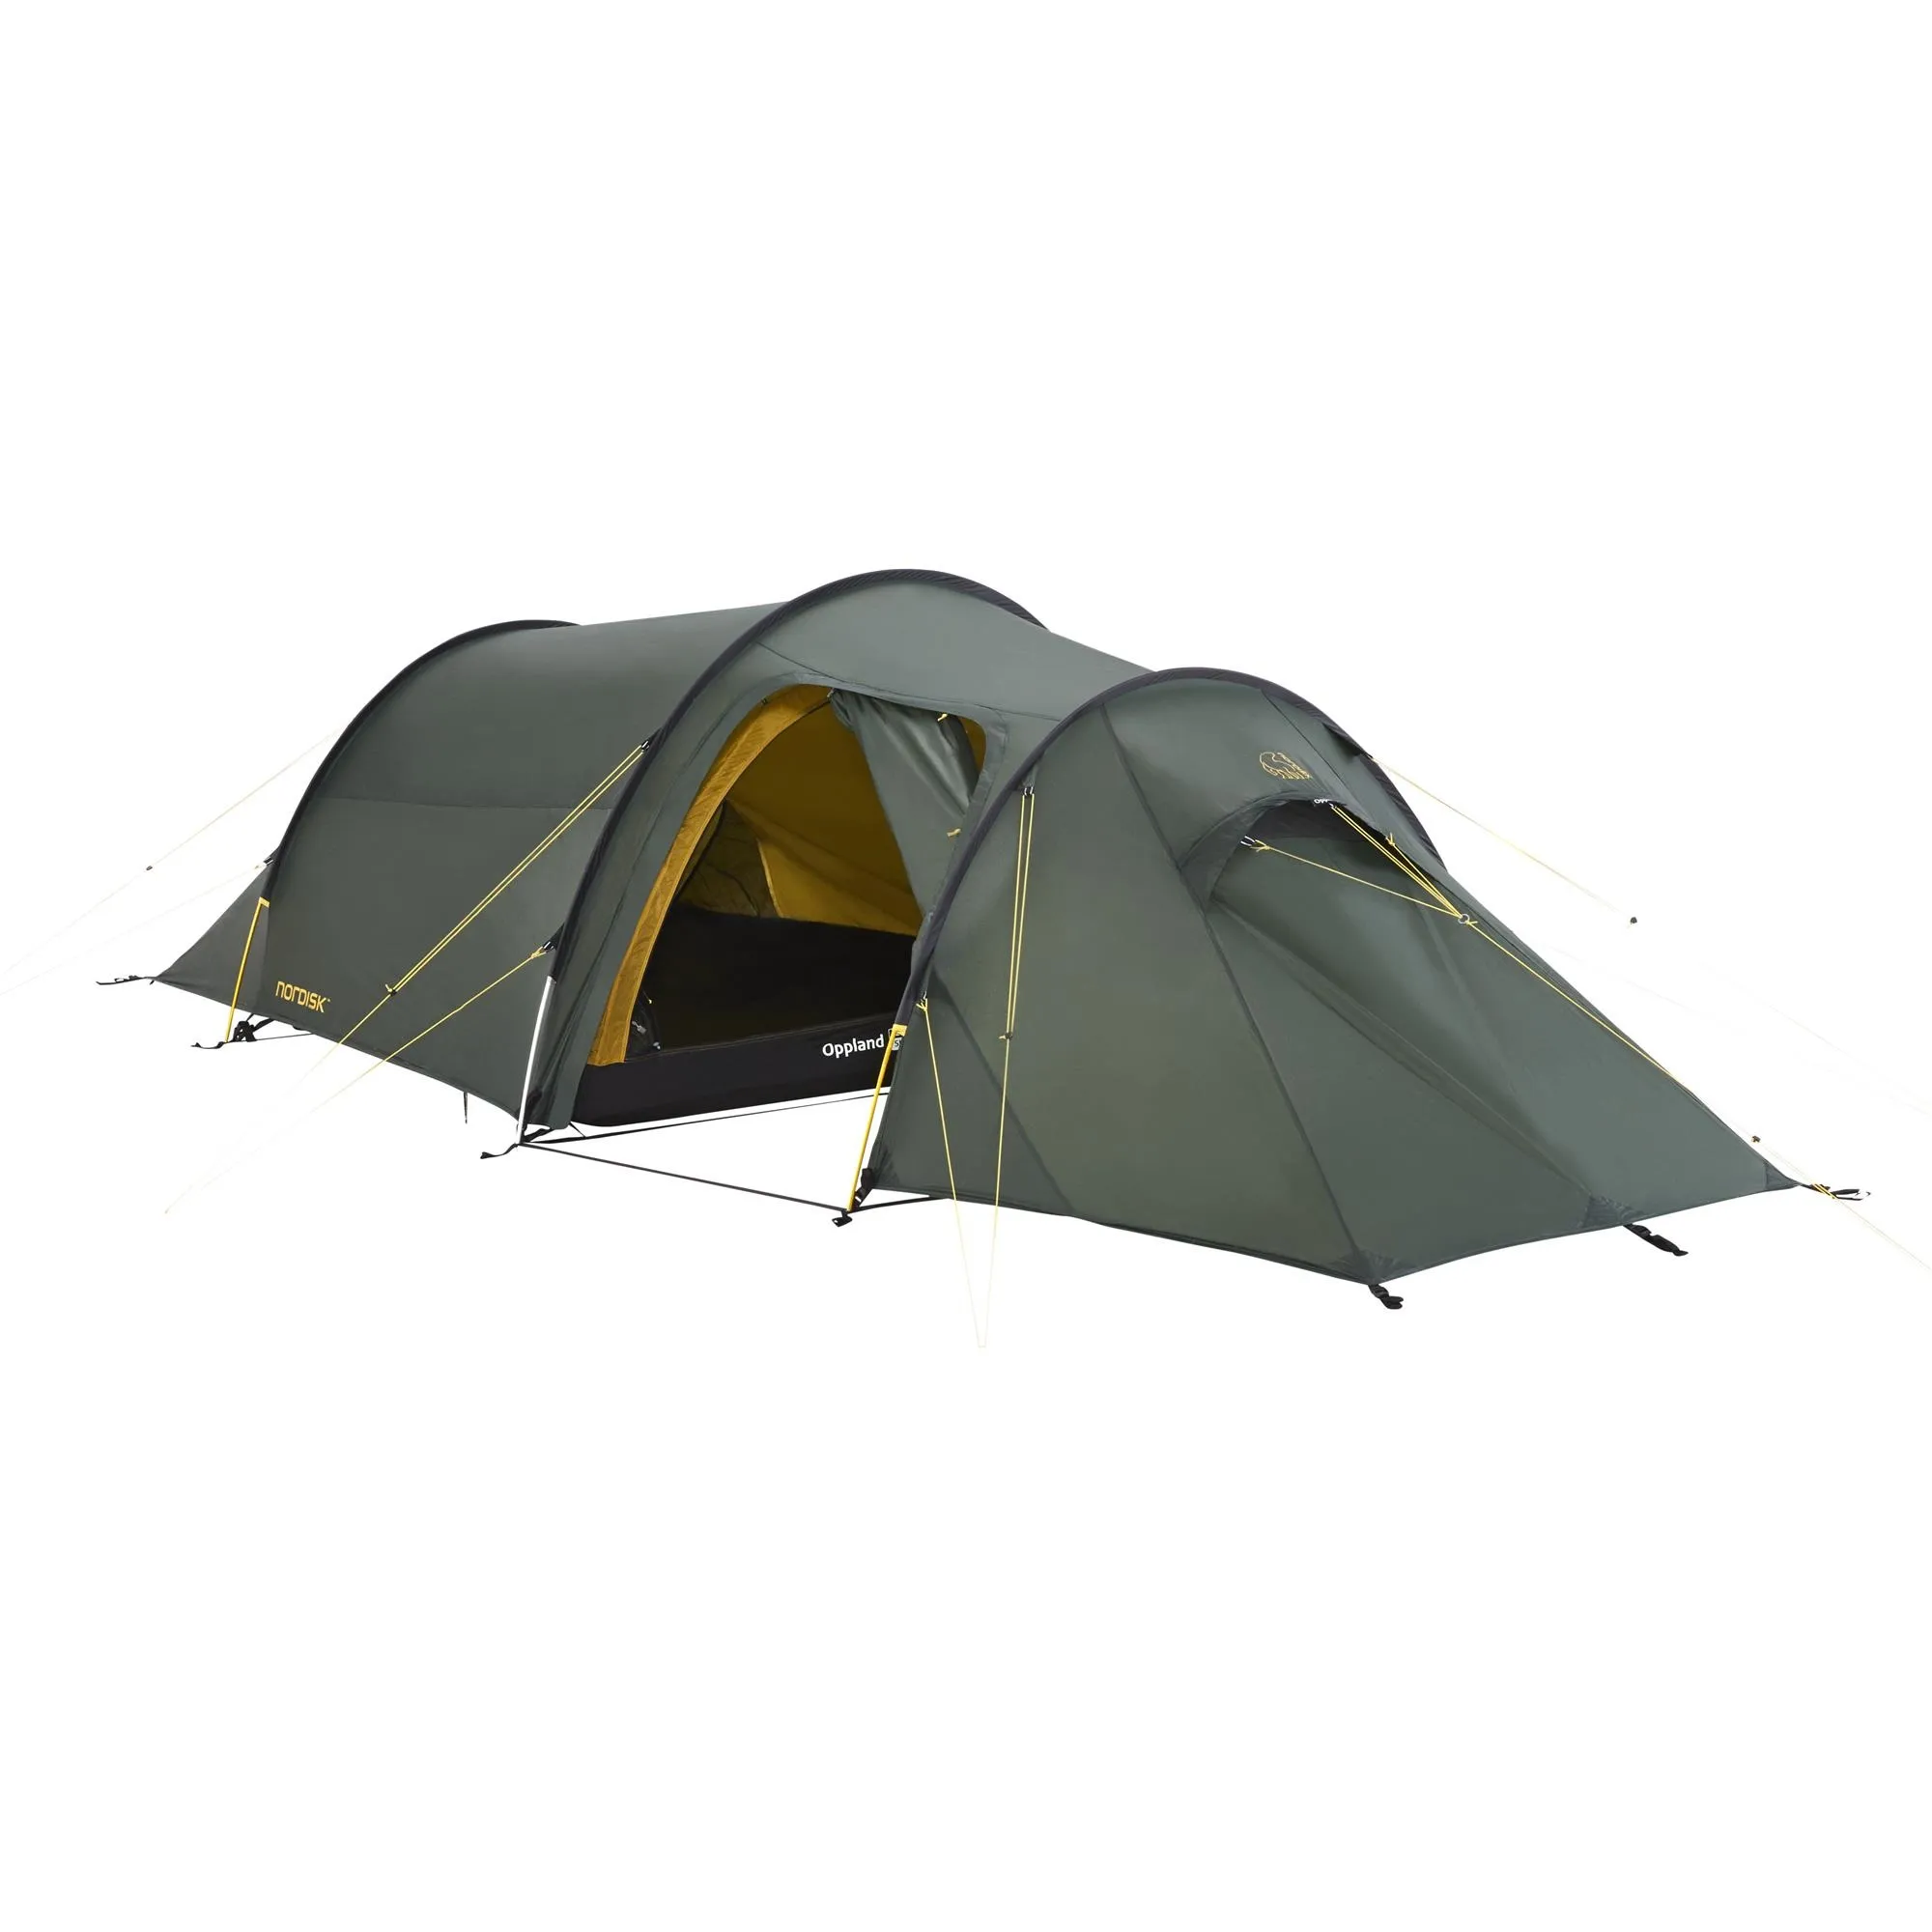 Oppland-2-si-112032-nordisk-classic-tunnel-two-man-tent-forest-green-2.jpg